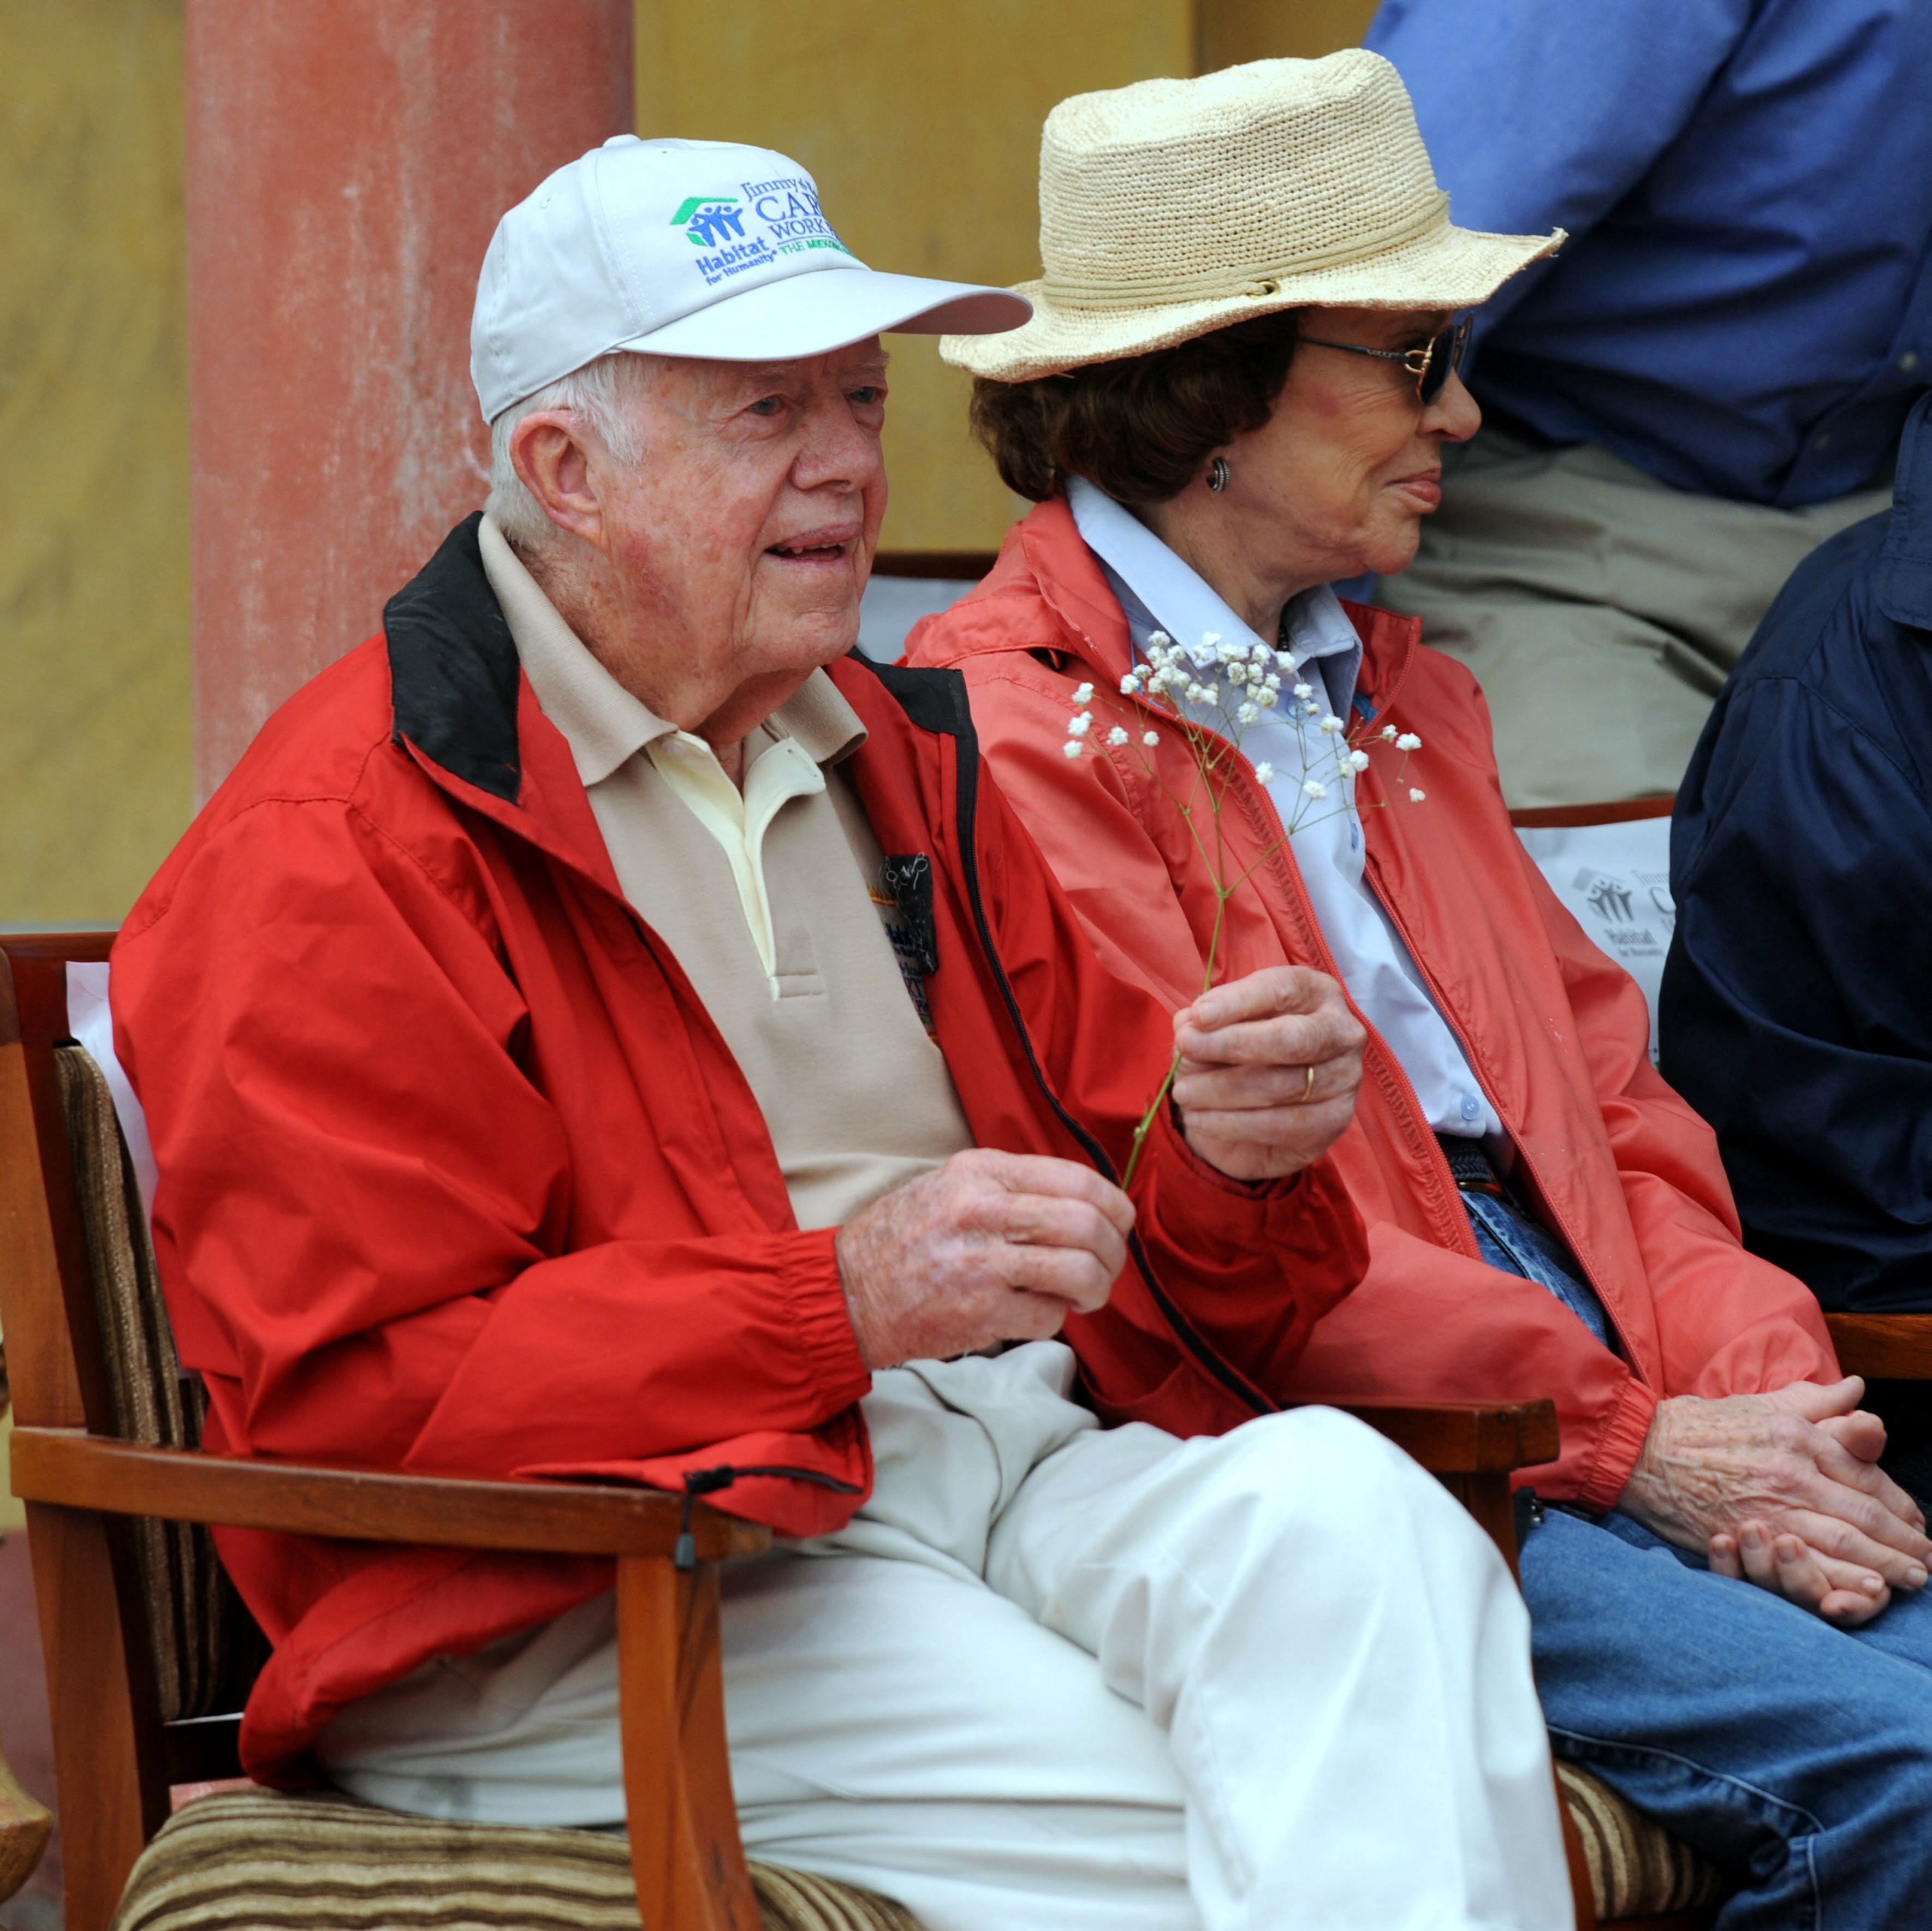 Jimmy and Rosalynn Carter during a welcoming ceremony for an event under the Habitat for Humanity campaign at Dong Xa village, in the northern province of Hai Duong on November 18, 2009. | Source: Getty Images